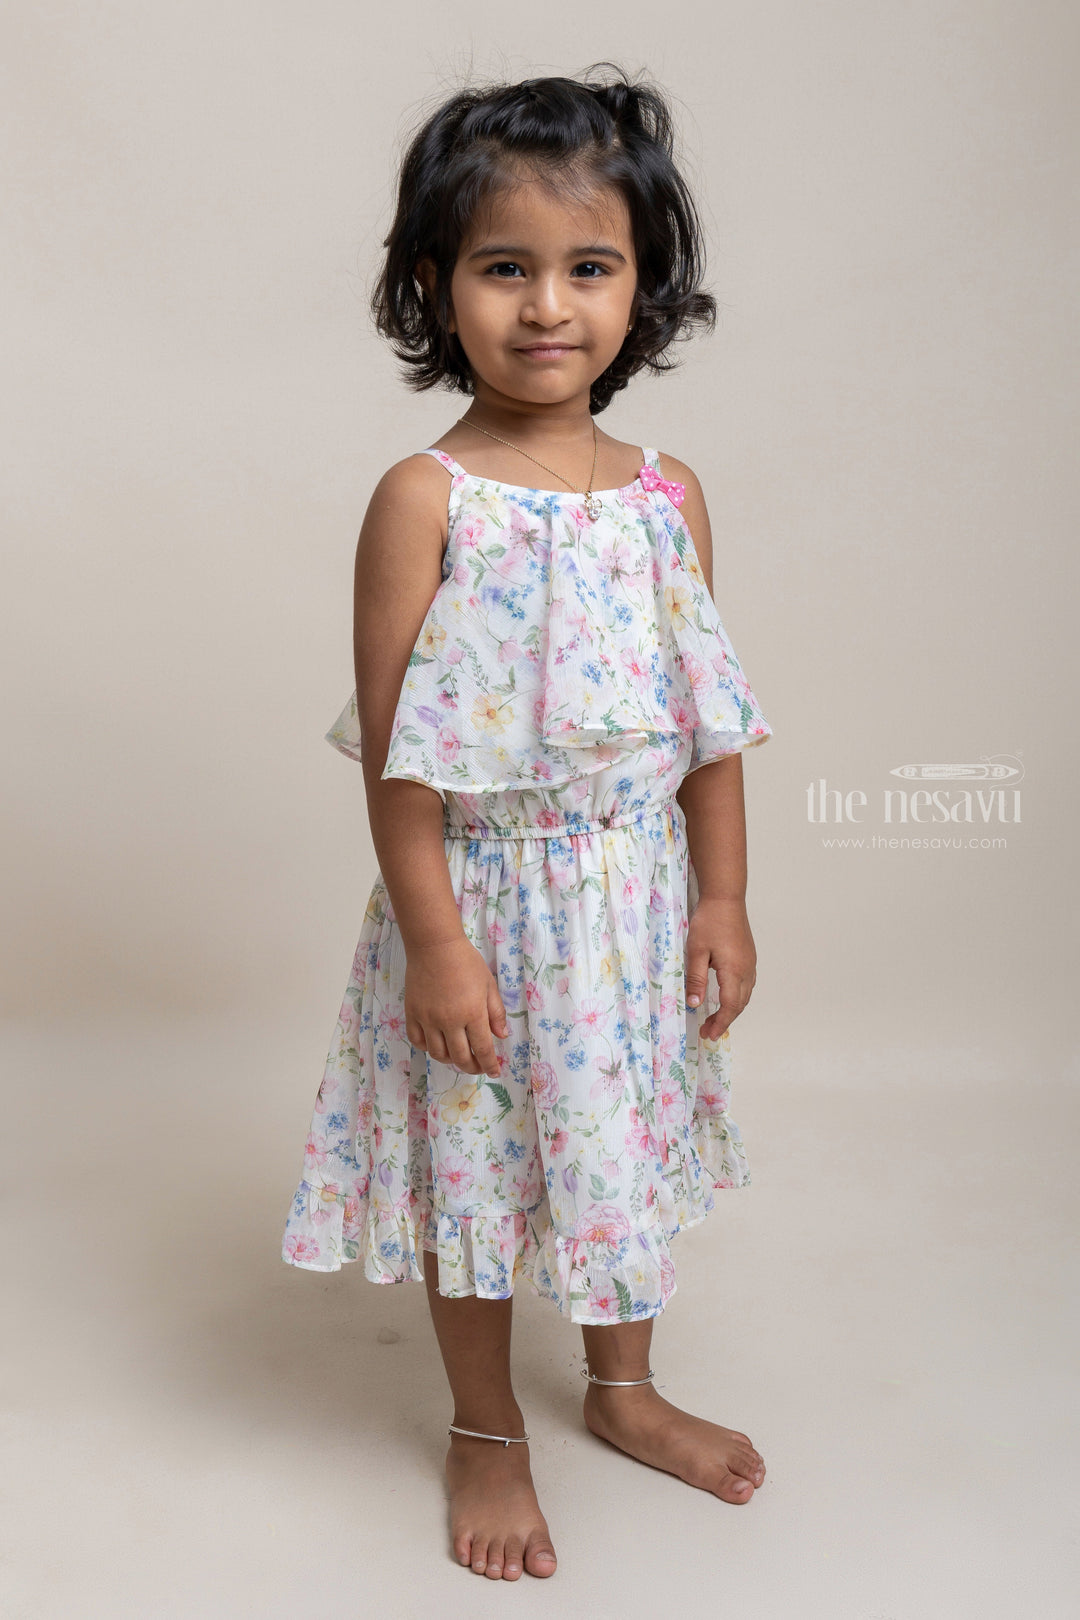 The Nesavu Baby Fancy Frock Stylish Multicolour Floral Printed Sleeveless Georgette Frock For Baby Girls Nesavu 16 (1Y) / multicolor / Chiffon BFJ349A Comfortable Baby Frocks online | Party Frocks For Babies | The Nesavu